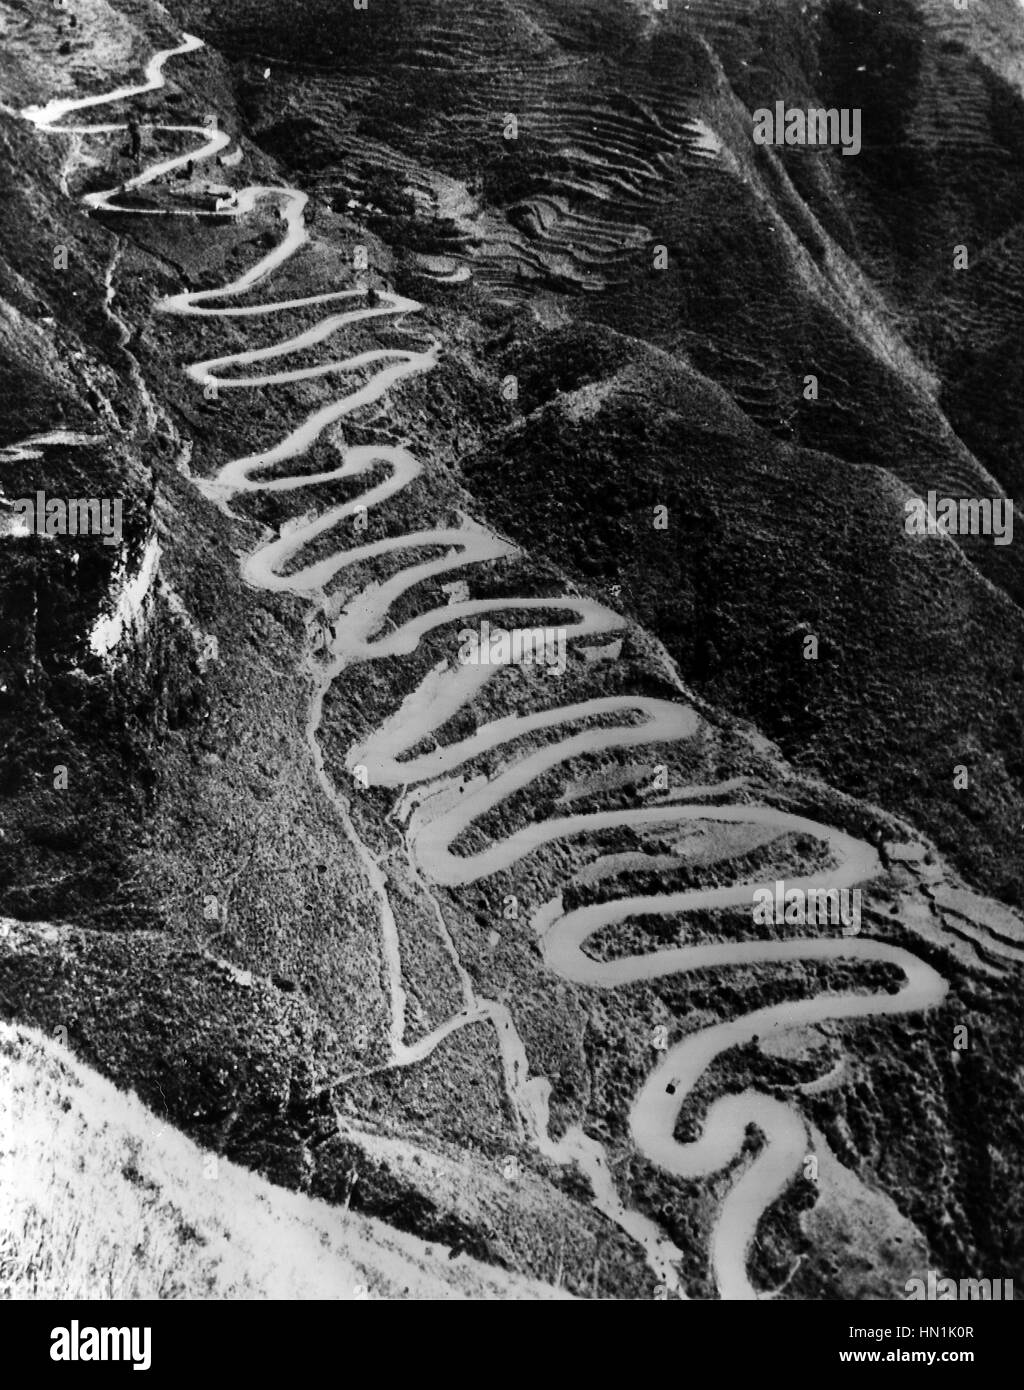 SECOND SINO-JAPANESE WAR (1937-1945)  The '24 Bends' section of road in Guizhou Province, China, over which western aid was carried. NB: sometimes mistaken for the Burma Road. Photo: USAAF Stock Photo